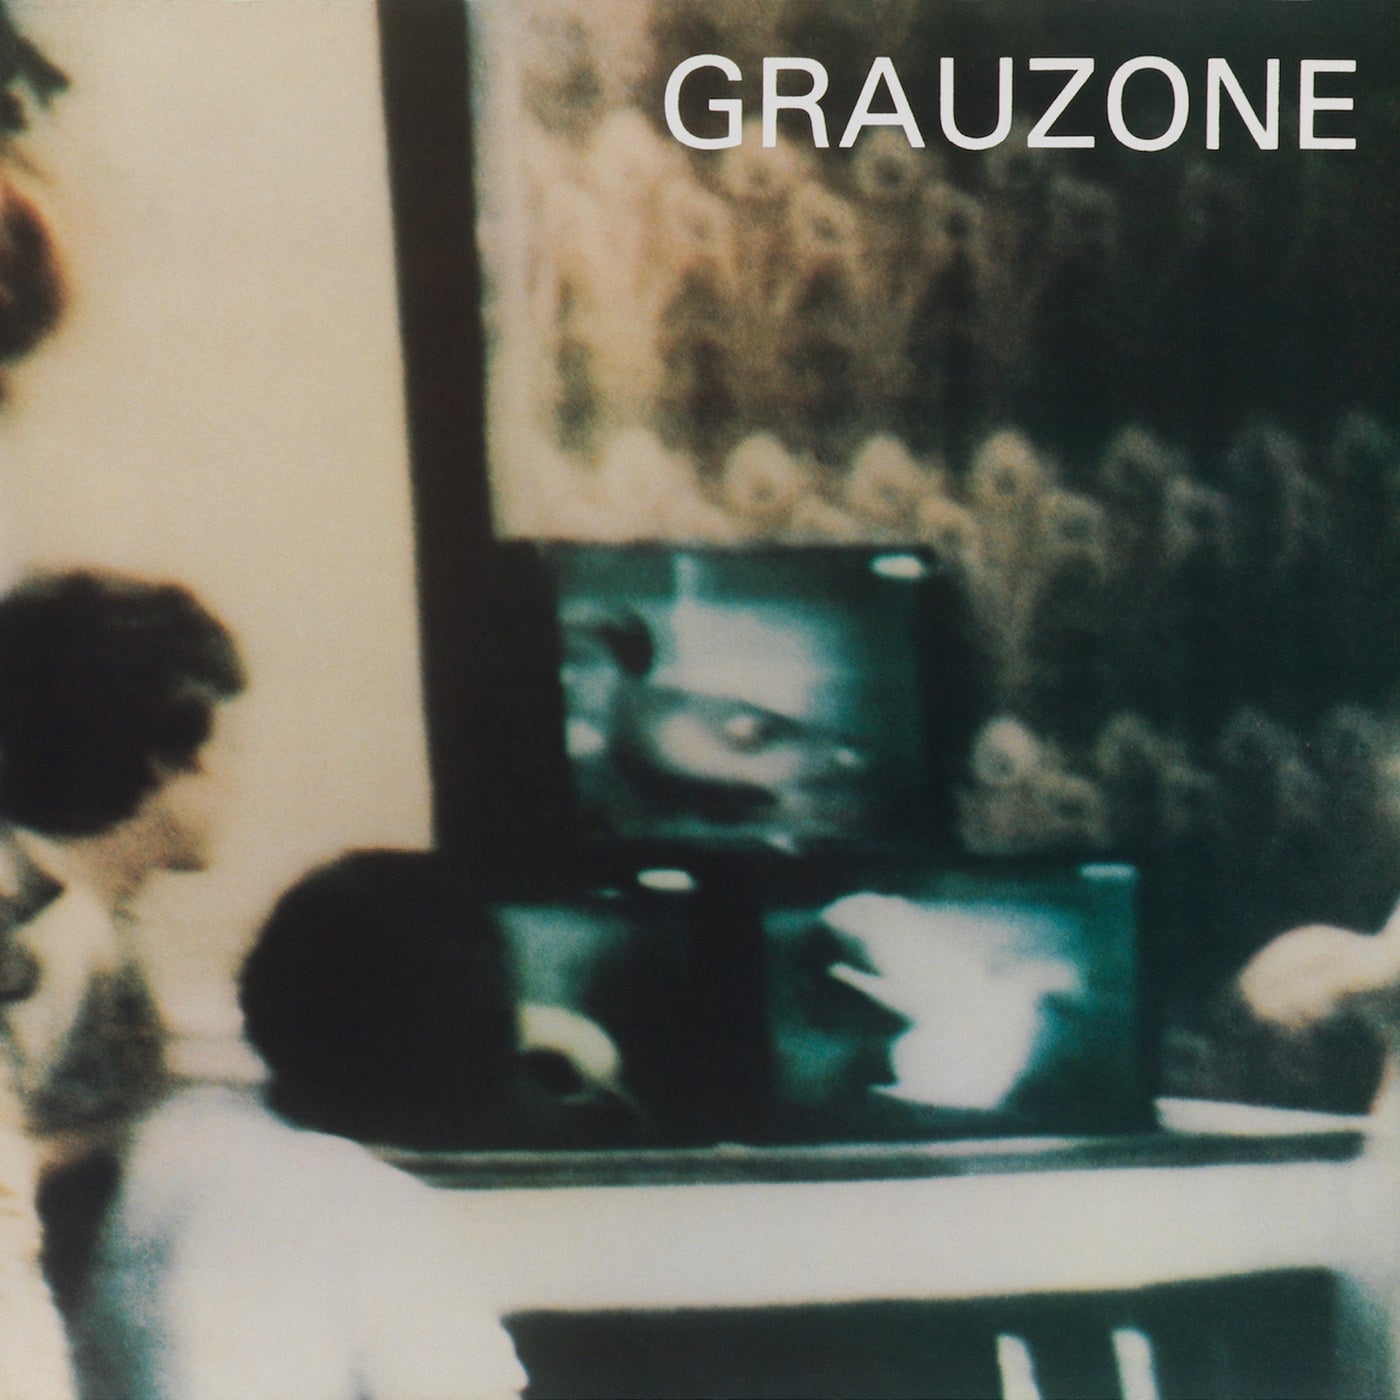 Download Grauzone (40 Years Anniversary Edition) on Electrobuzz